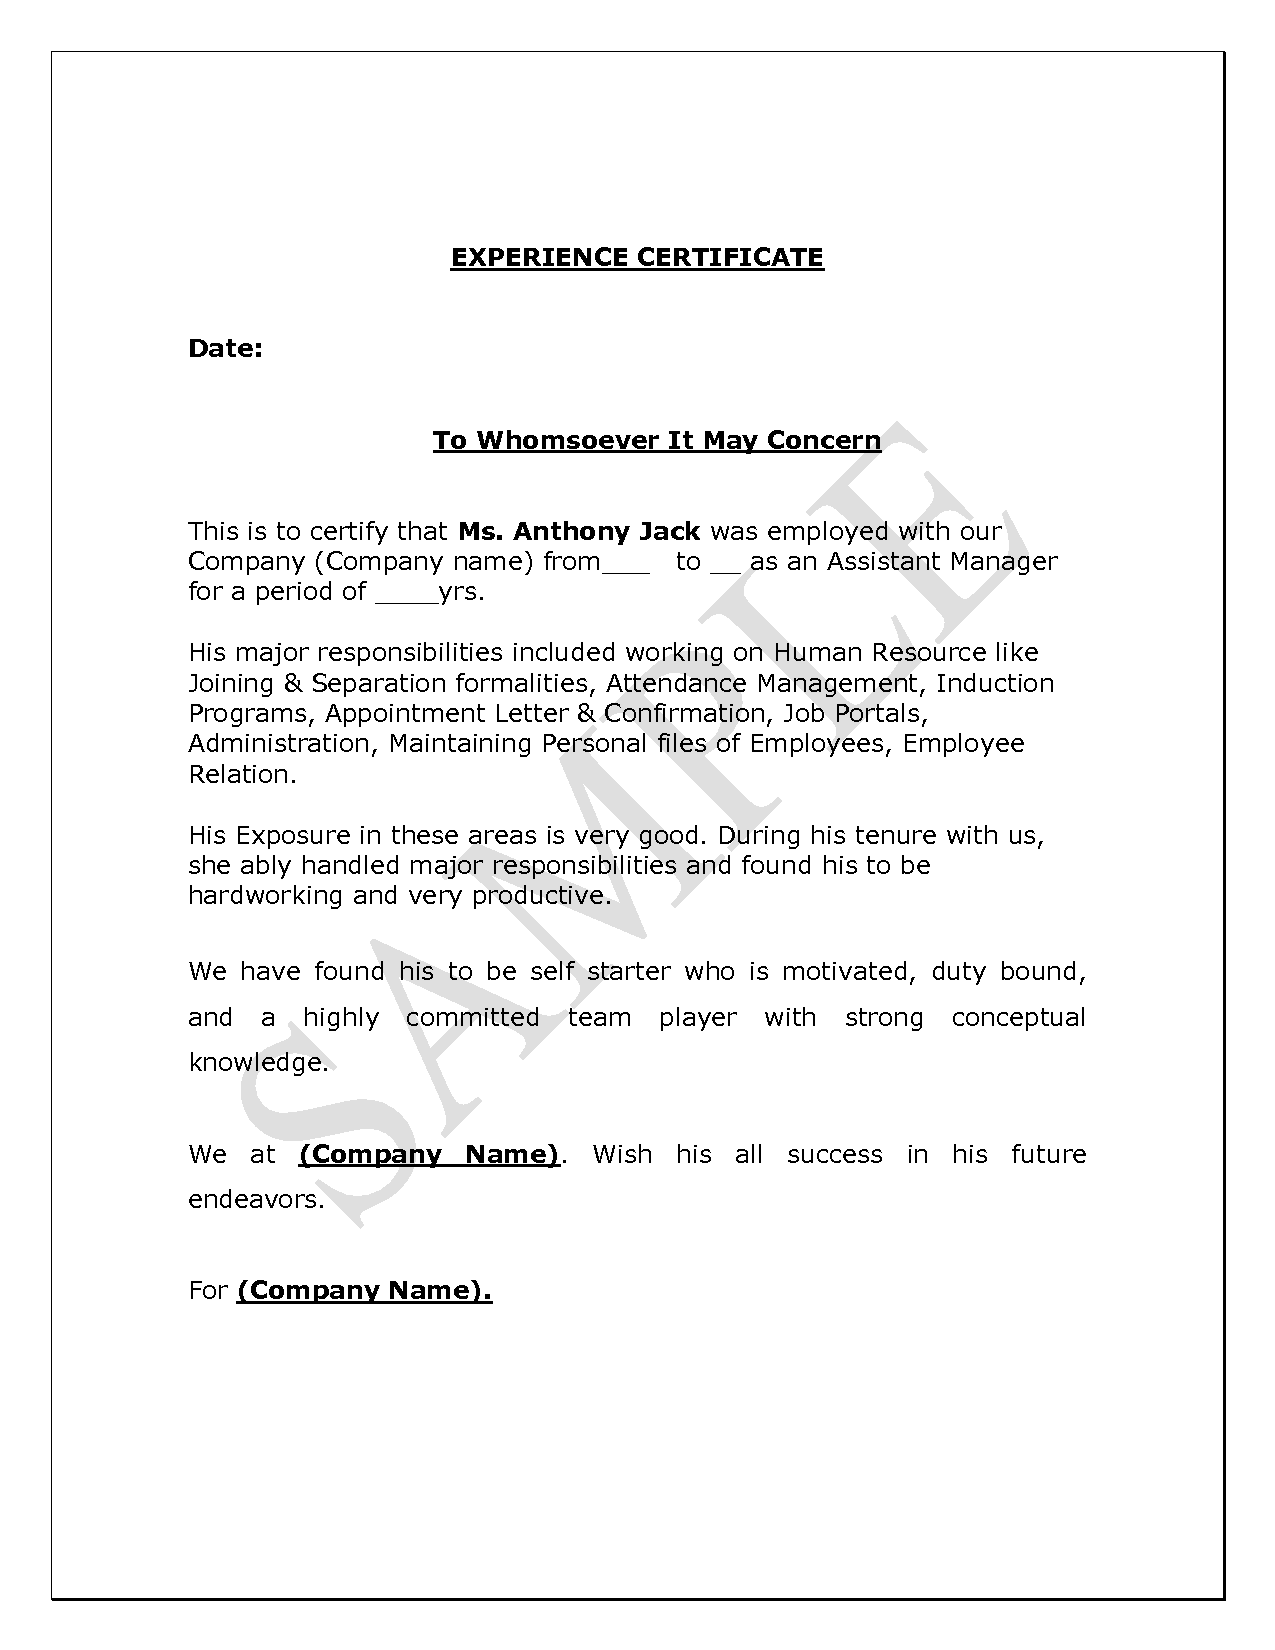 format of experience certificate